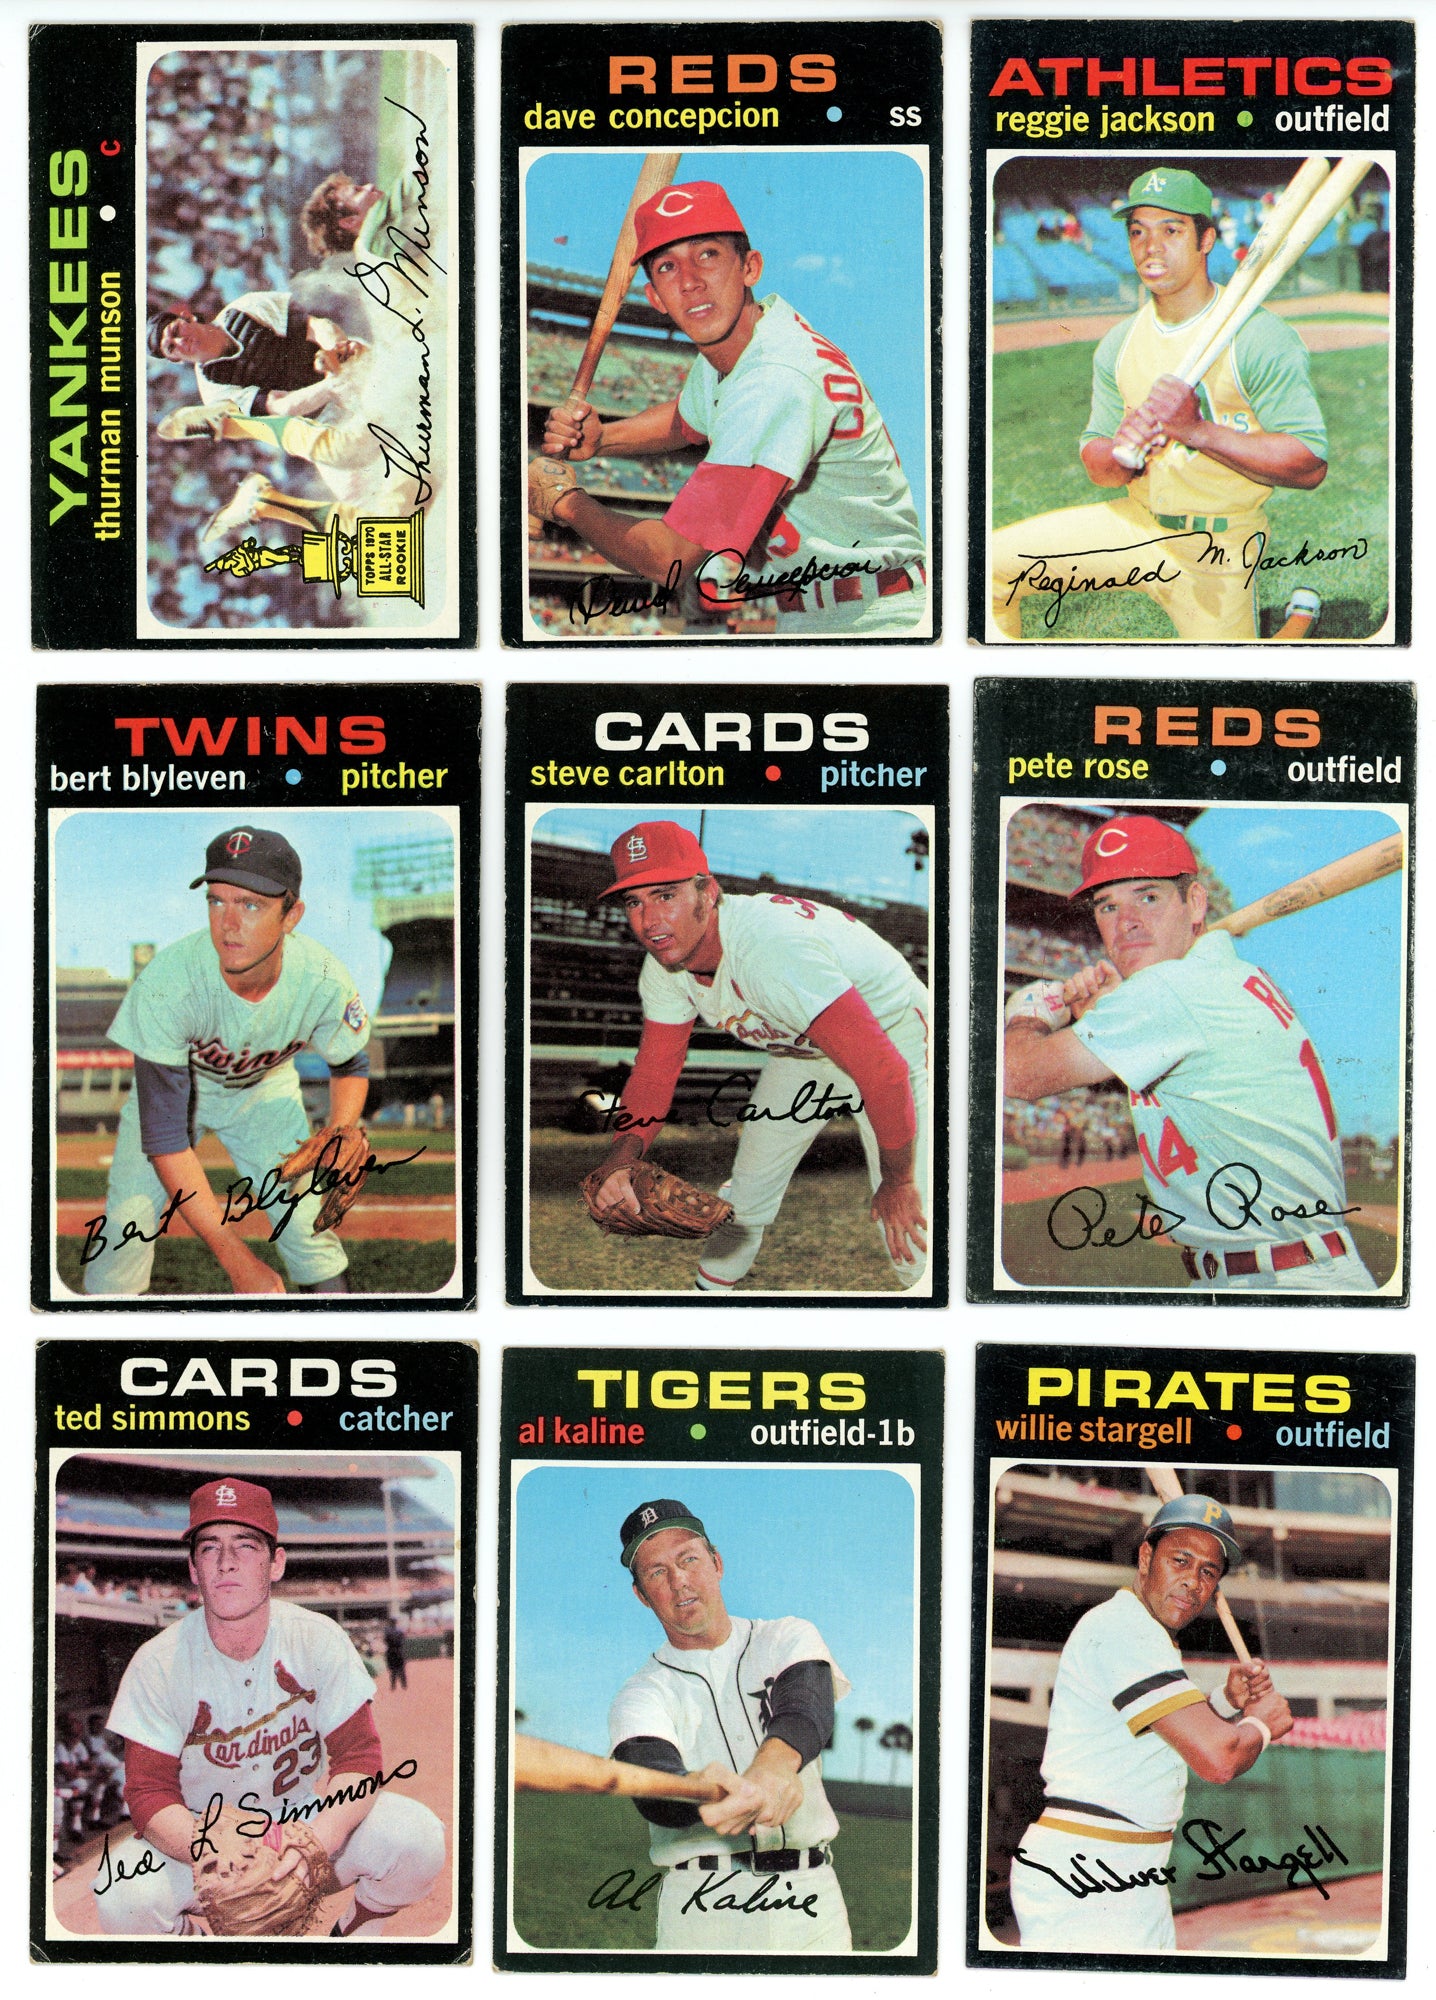 1971 TOPPS BASEBALL COMPLETE SET BREAK - 20 CARDS PER BOX! WITH 1 OR MORE HOFer AND 2 HIGH NUMBER CARDS!